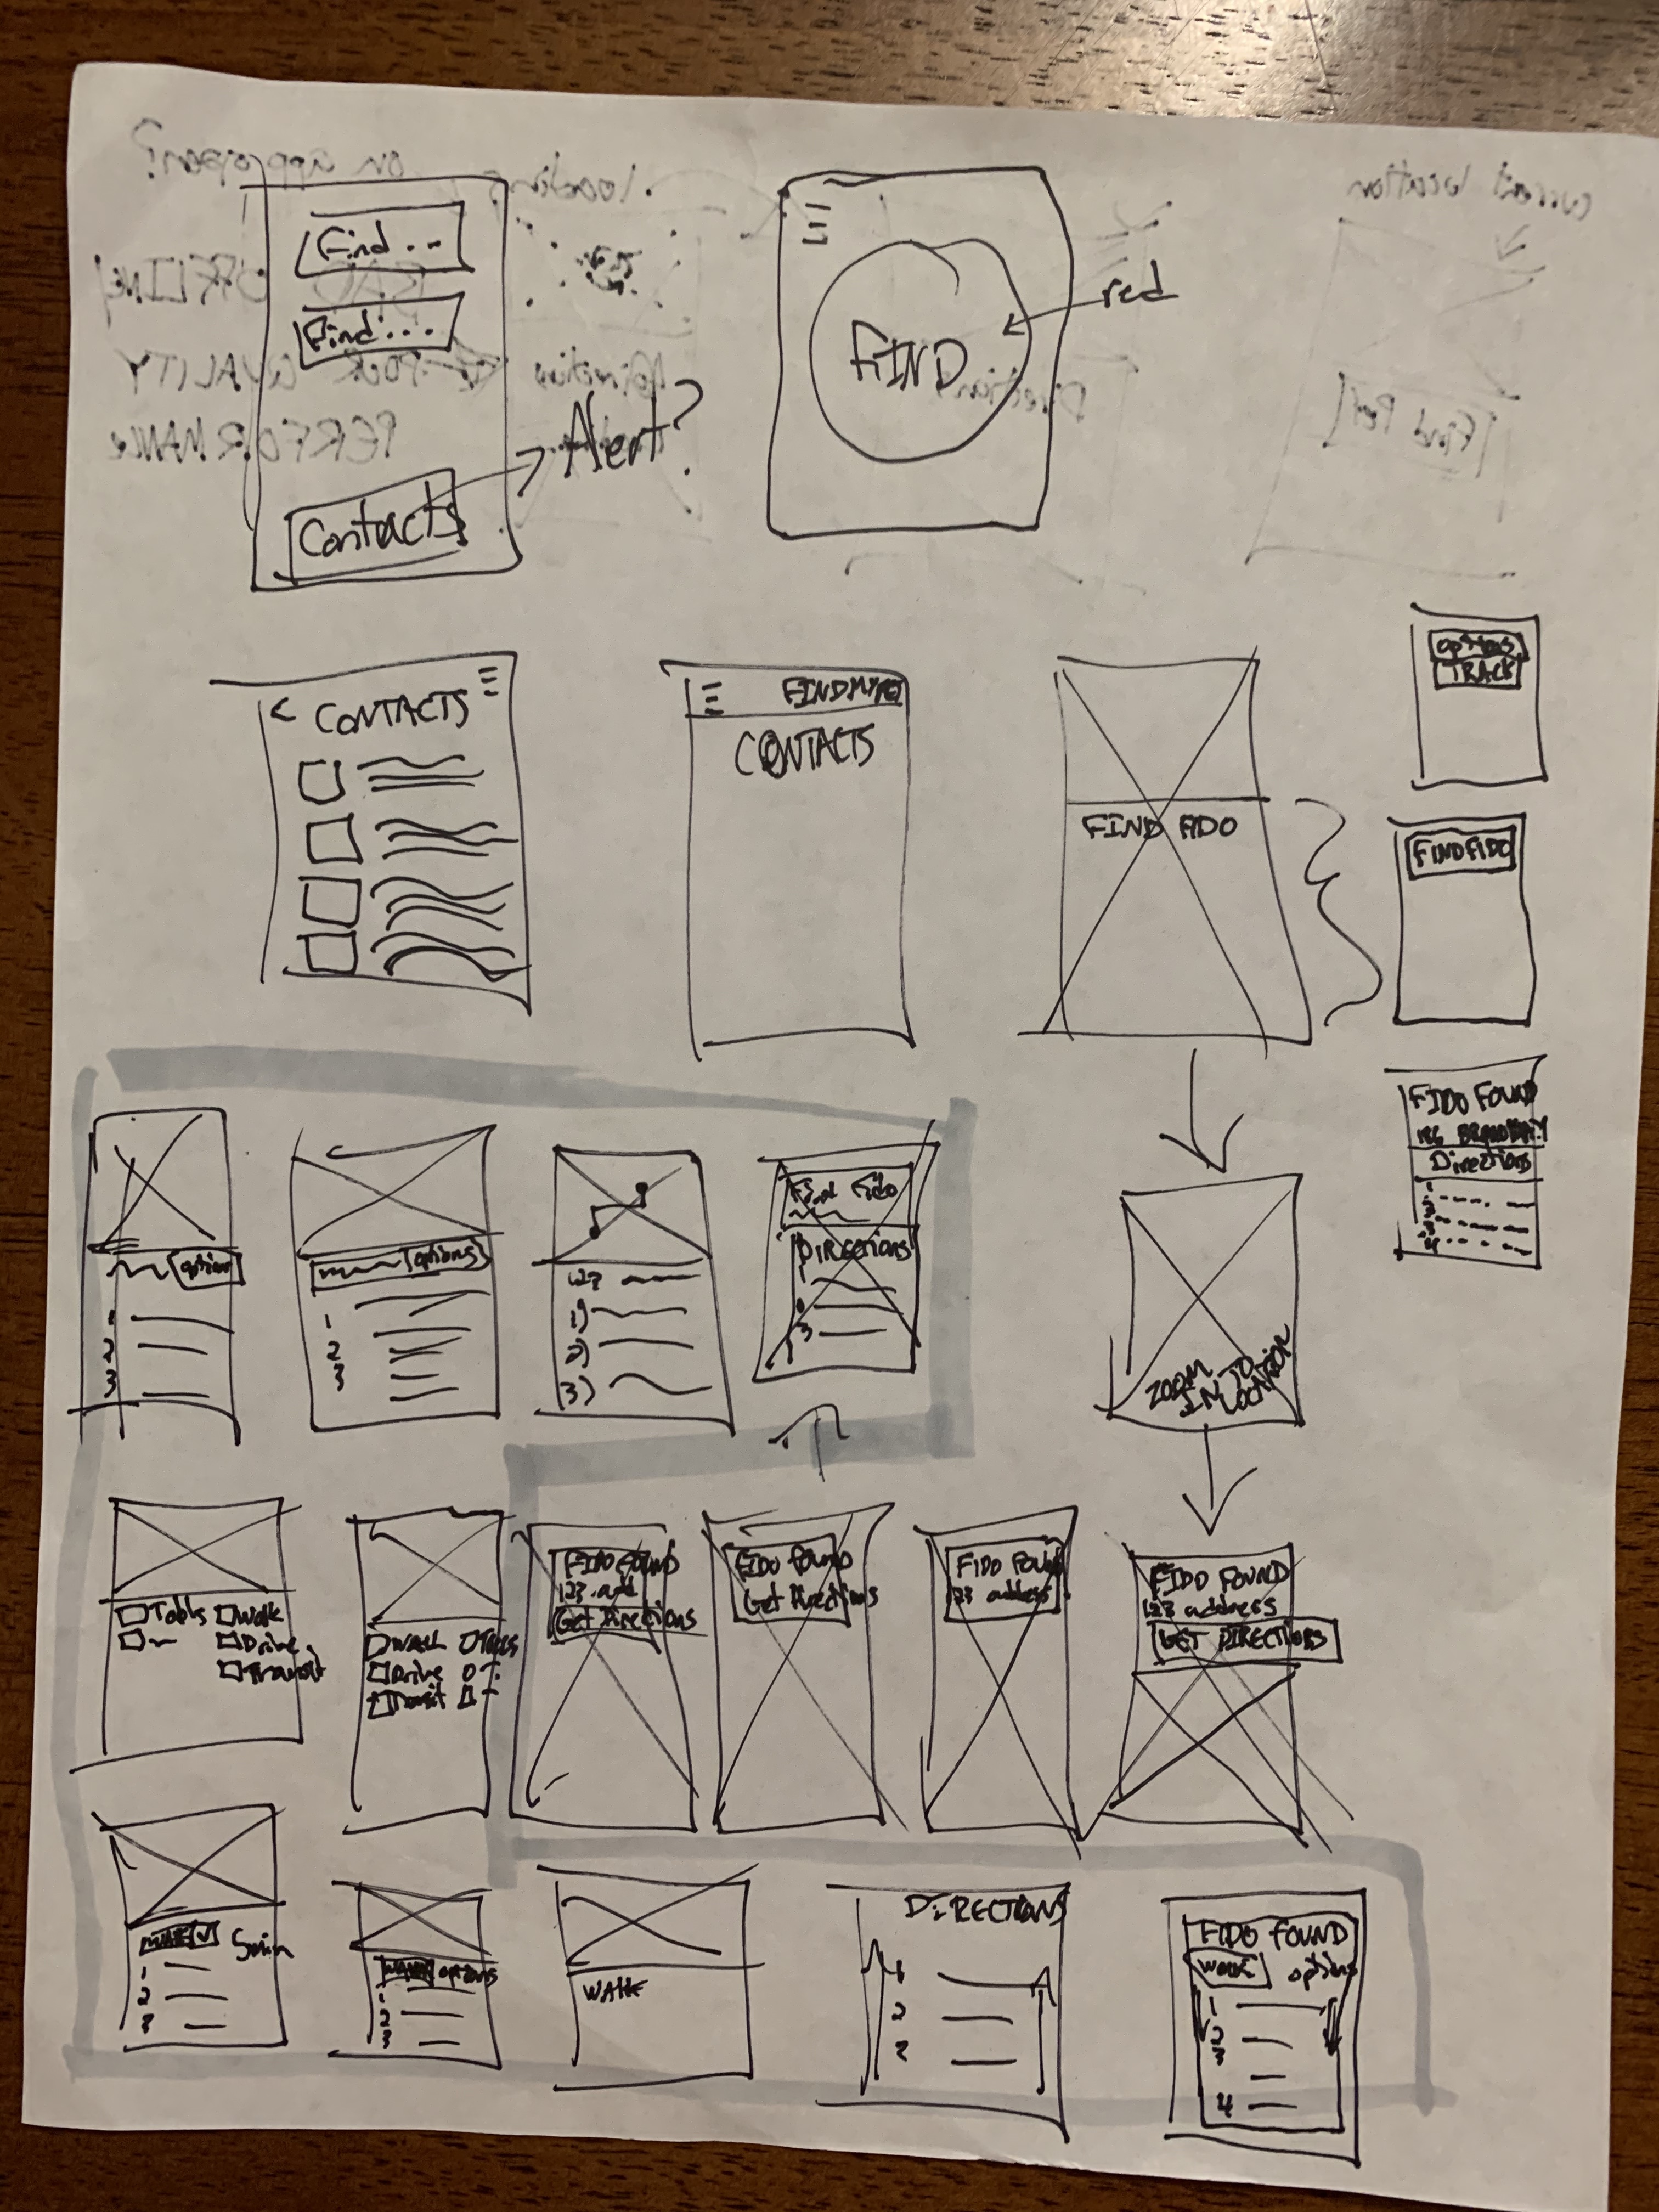 Sketches of Find My Pet application main pages.